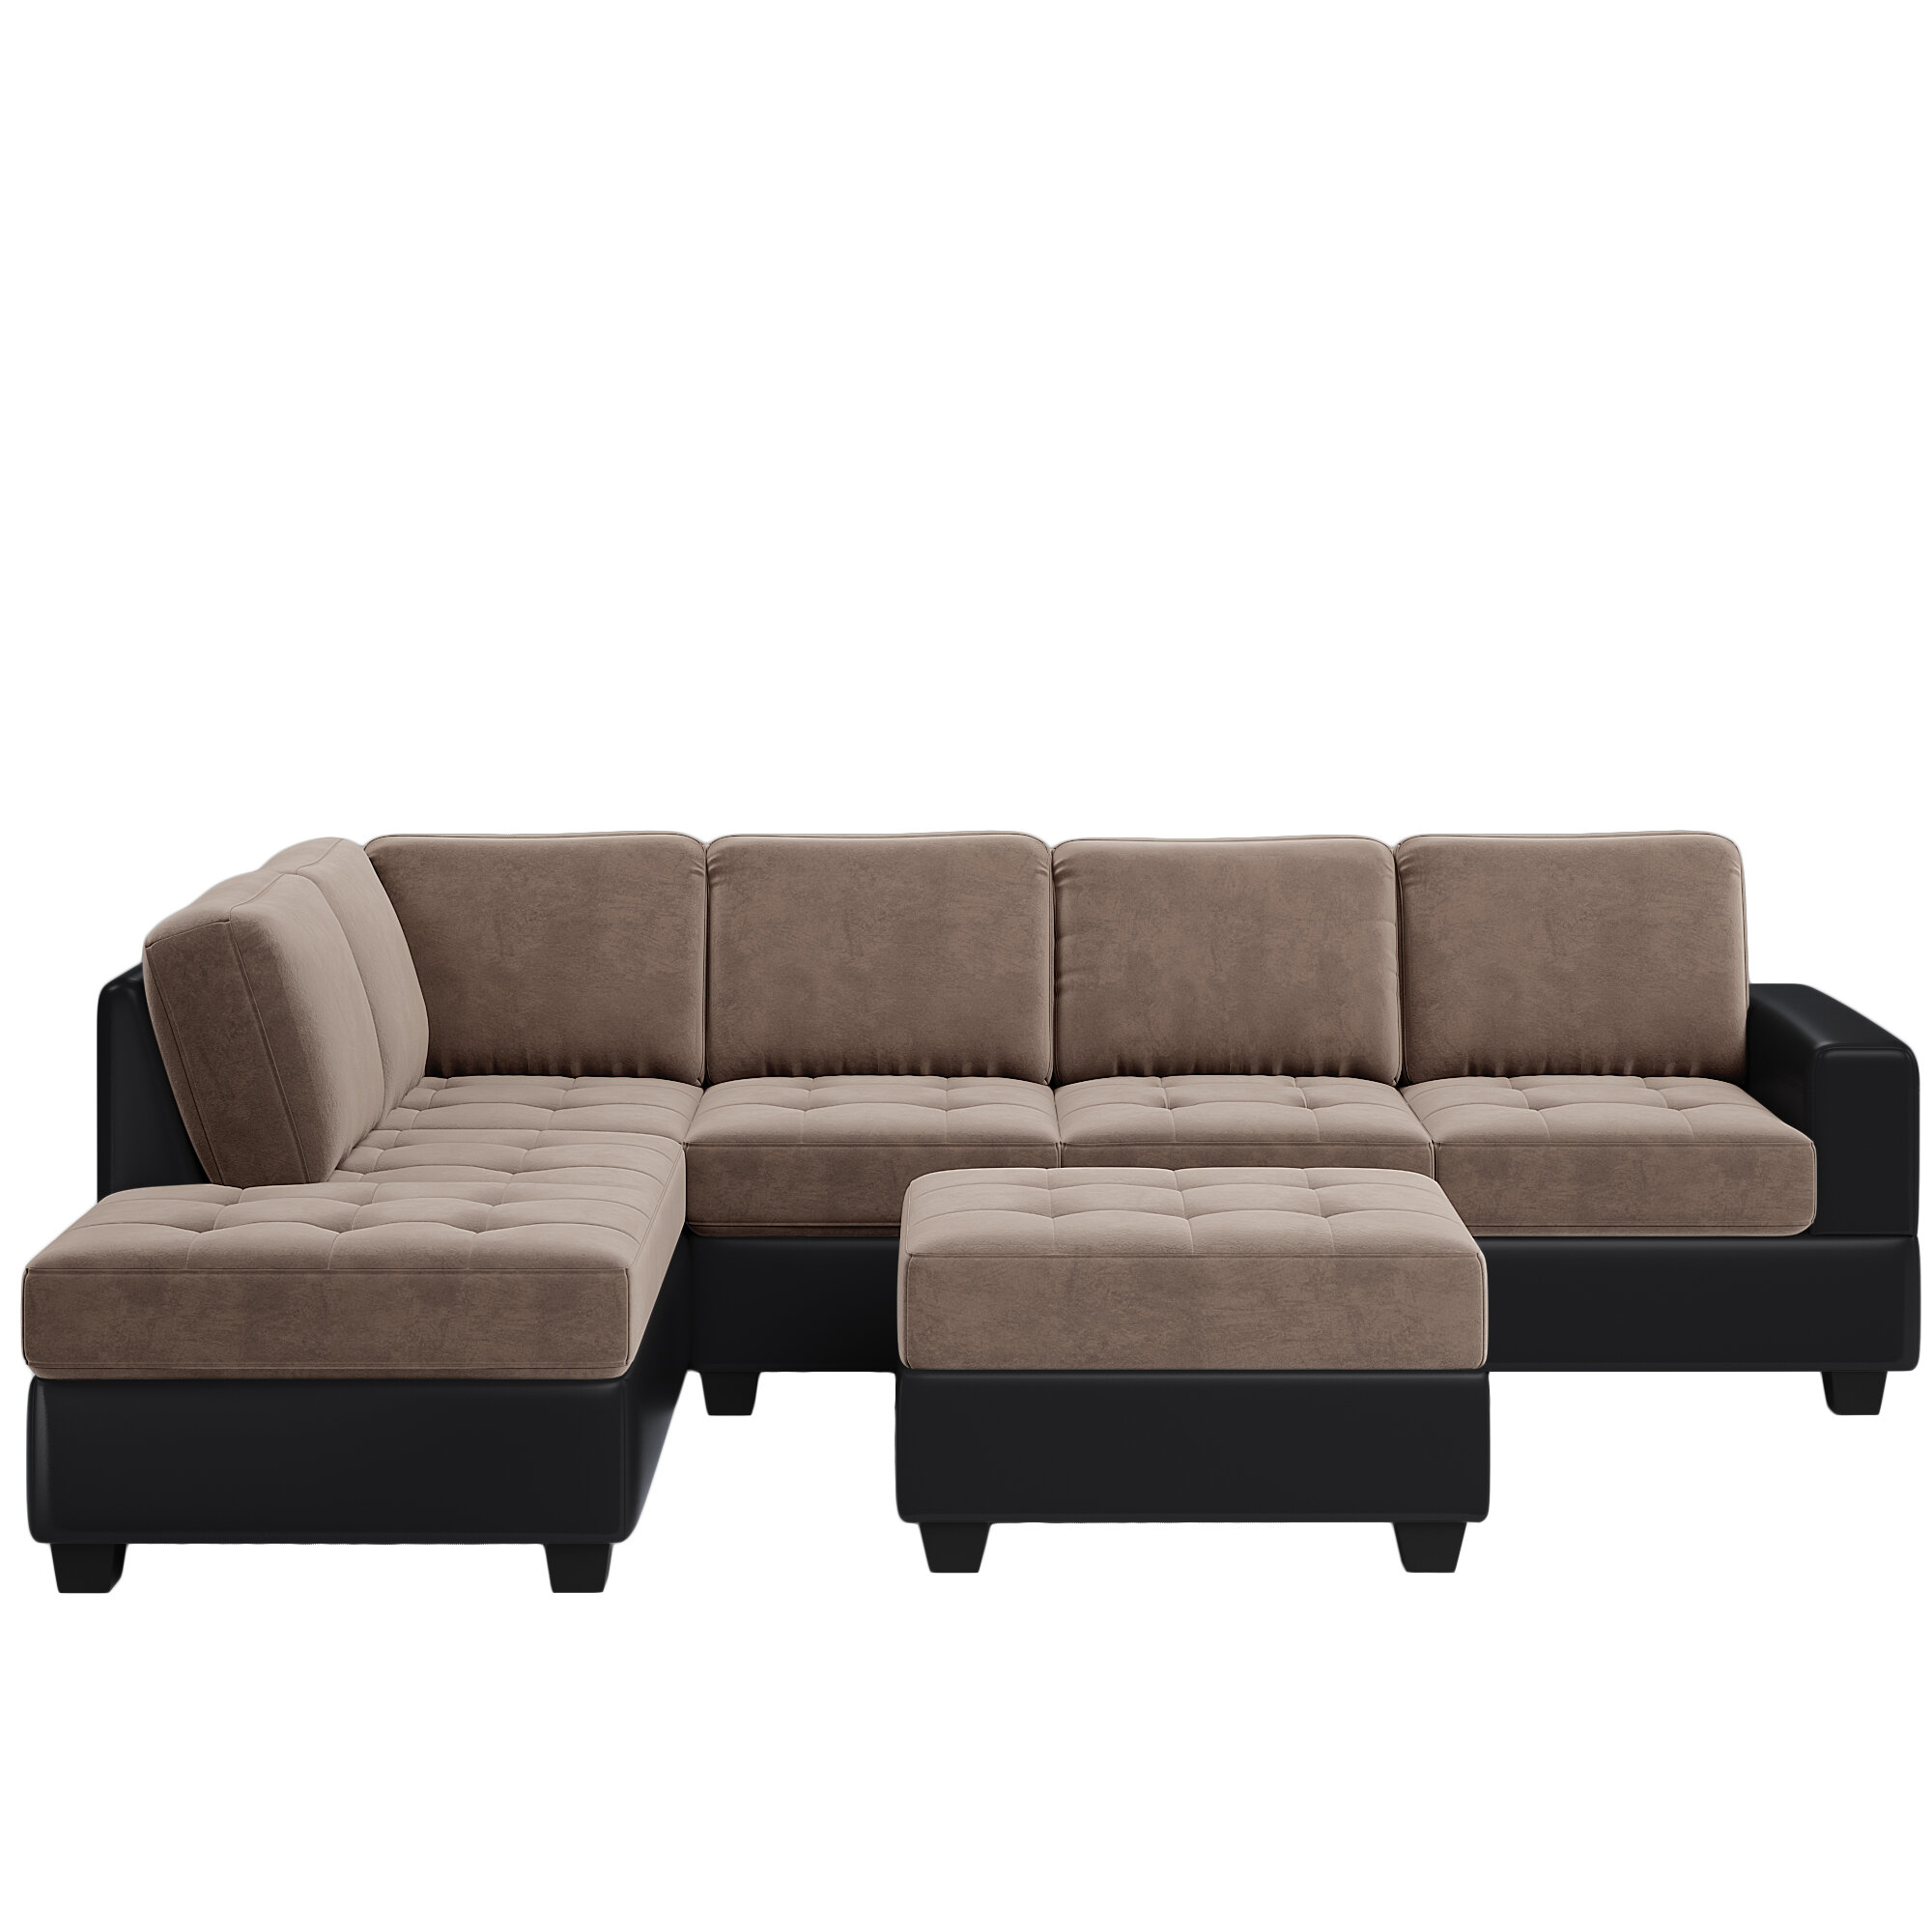 L-Shaped Couch Sofa with Reversible Chaise Lounge Storage Ottoman and Cup Holders Furniture Set-Elegant Grey Modern Microfiber Sectional